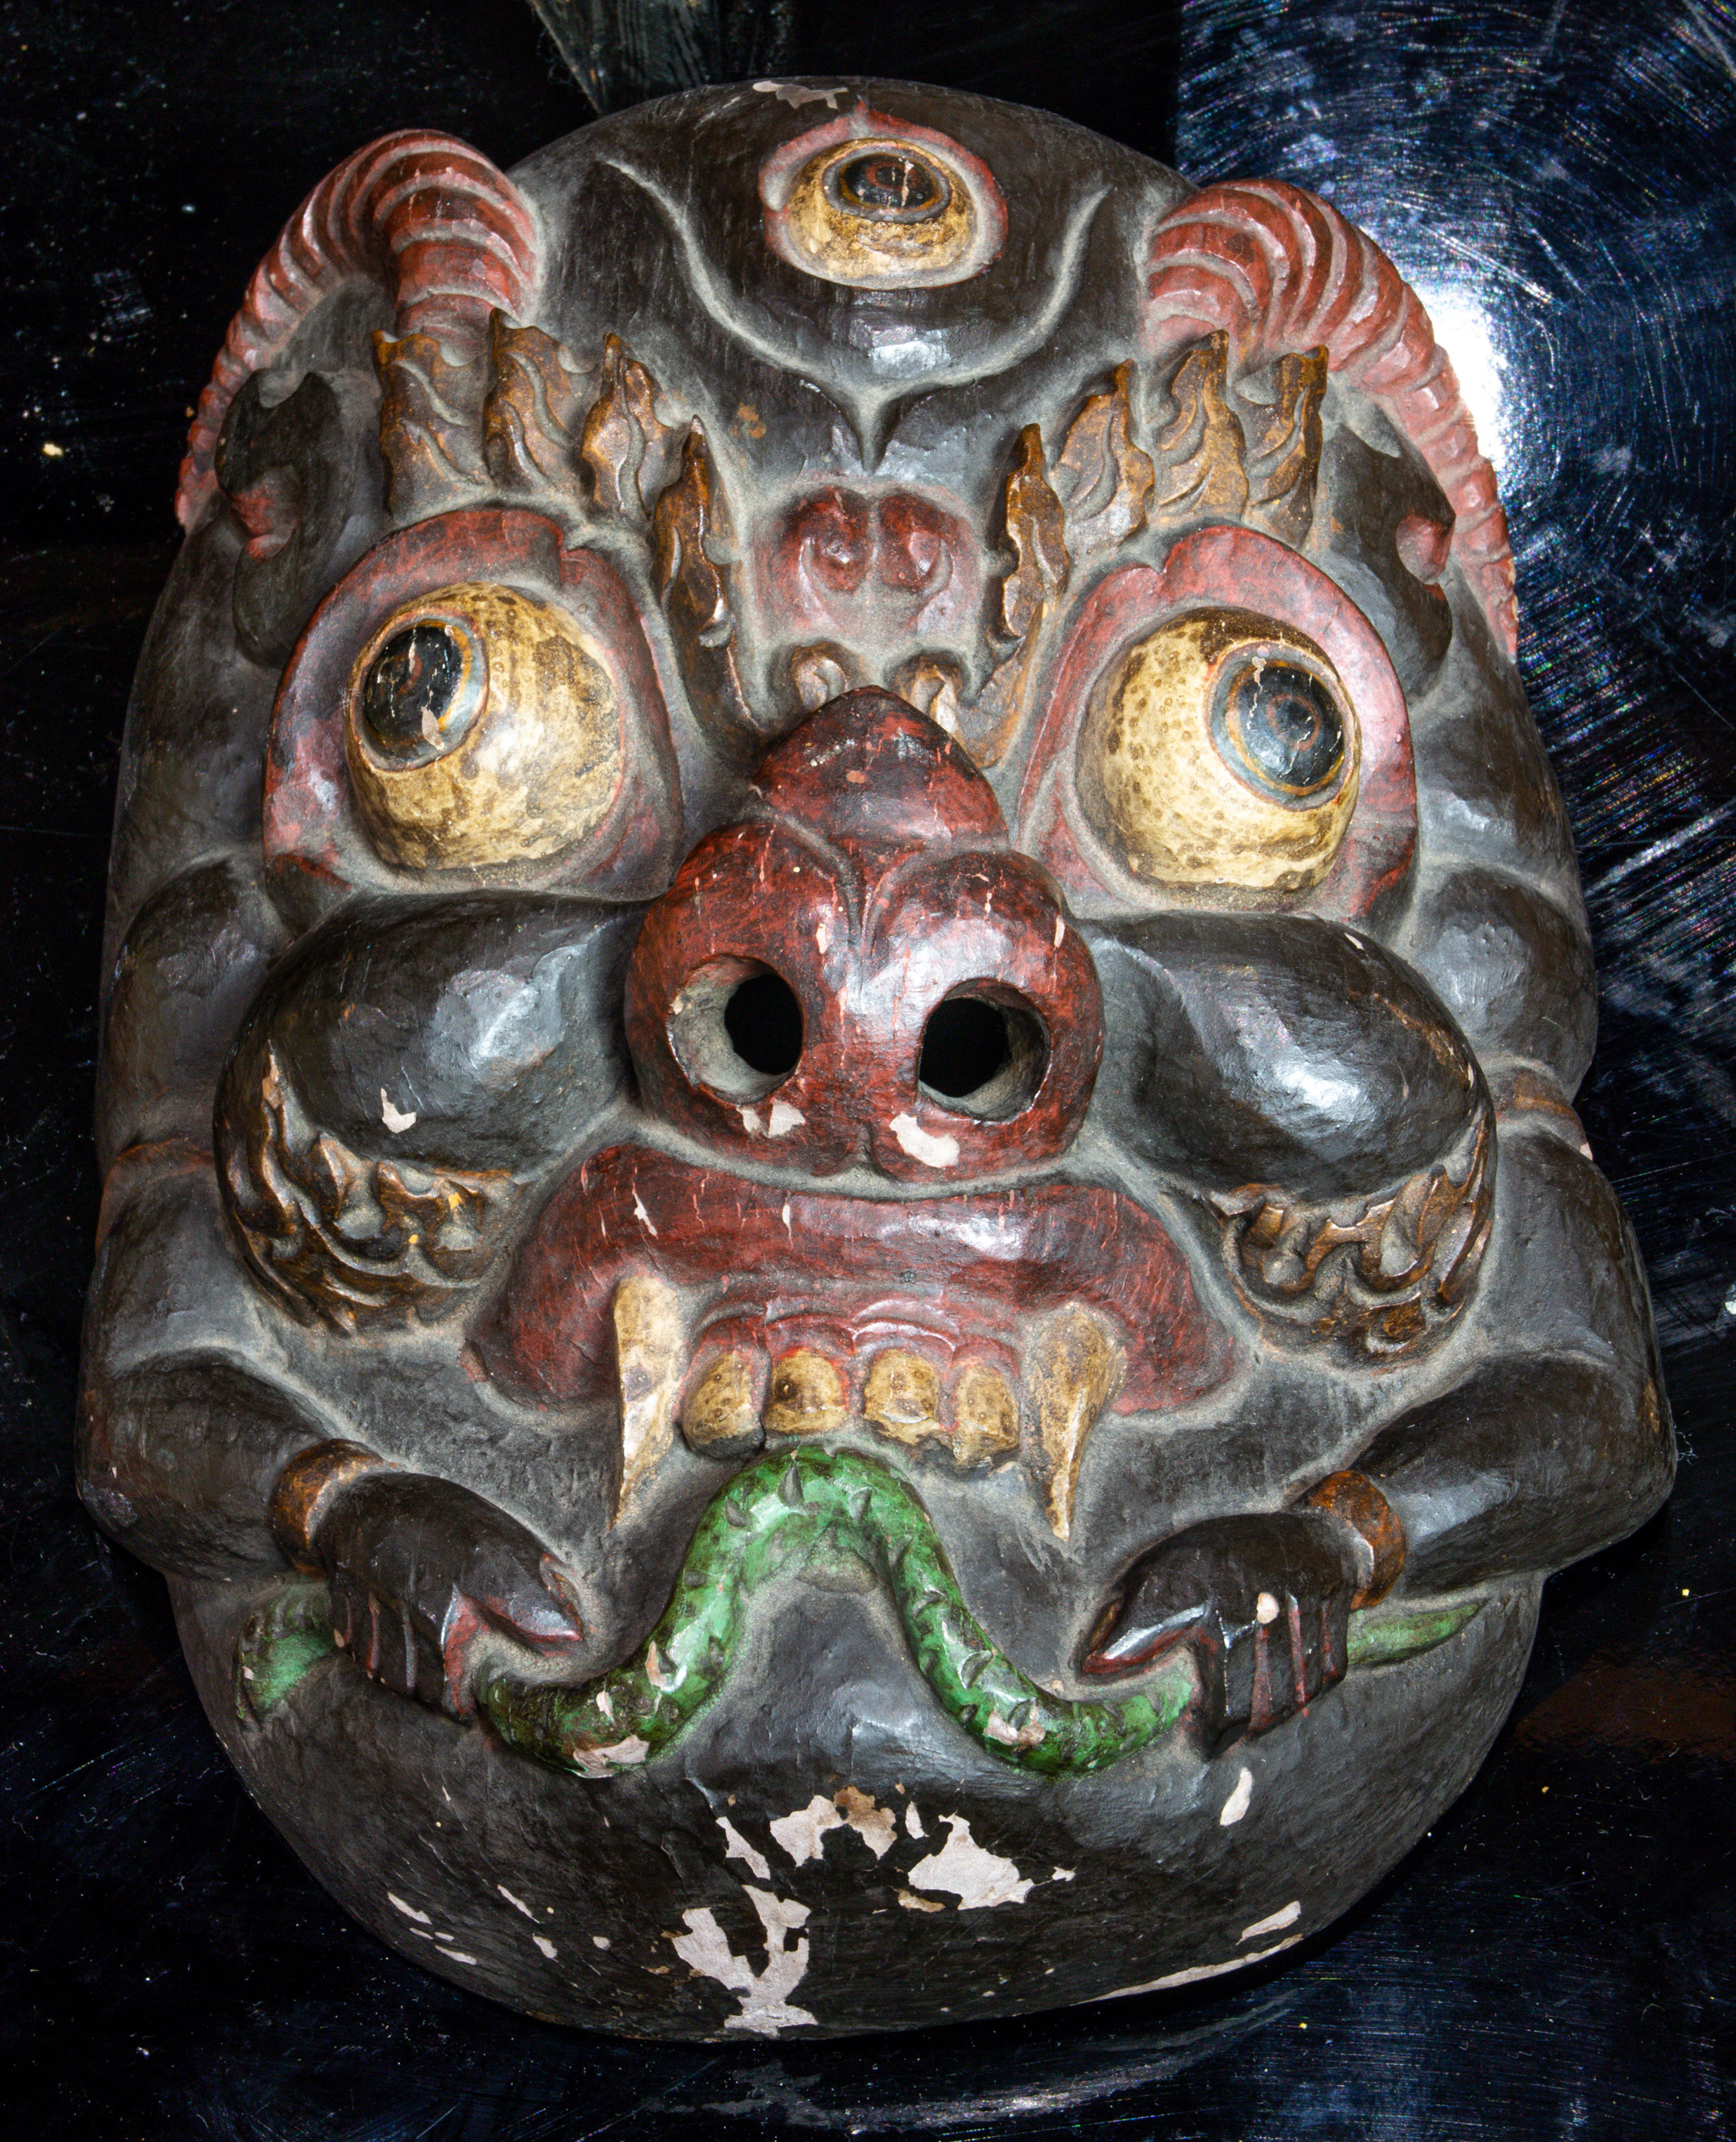 ELABORATELY CARVED AND PAINTED MASK